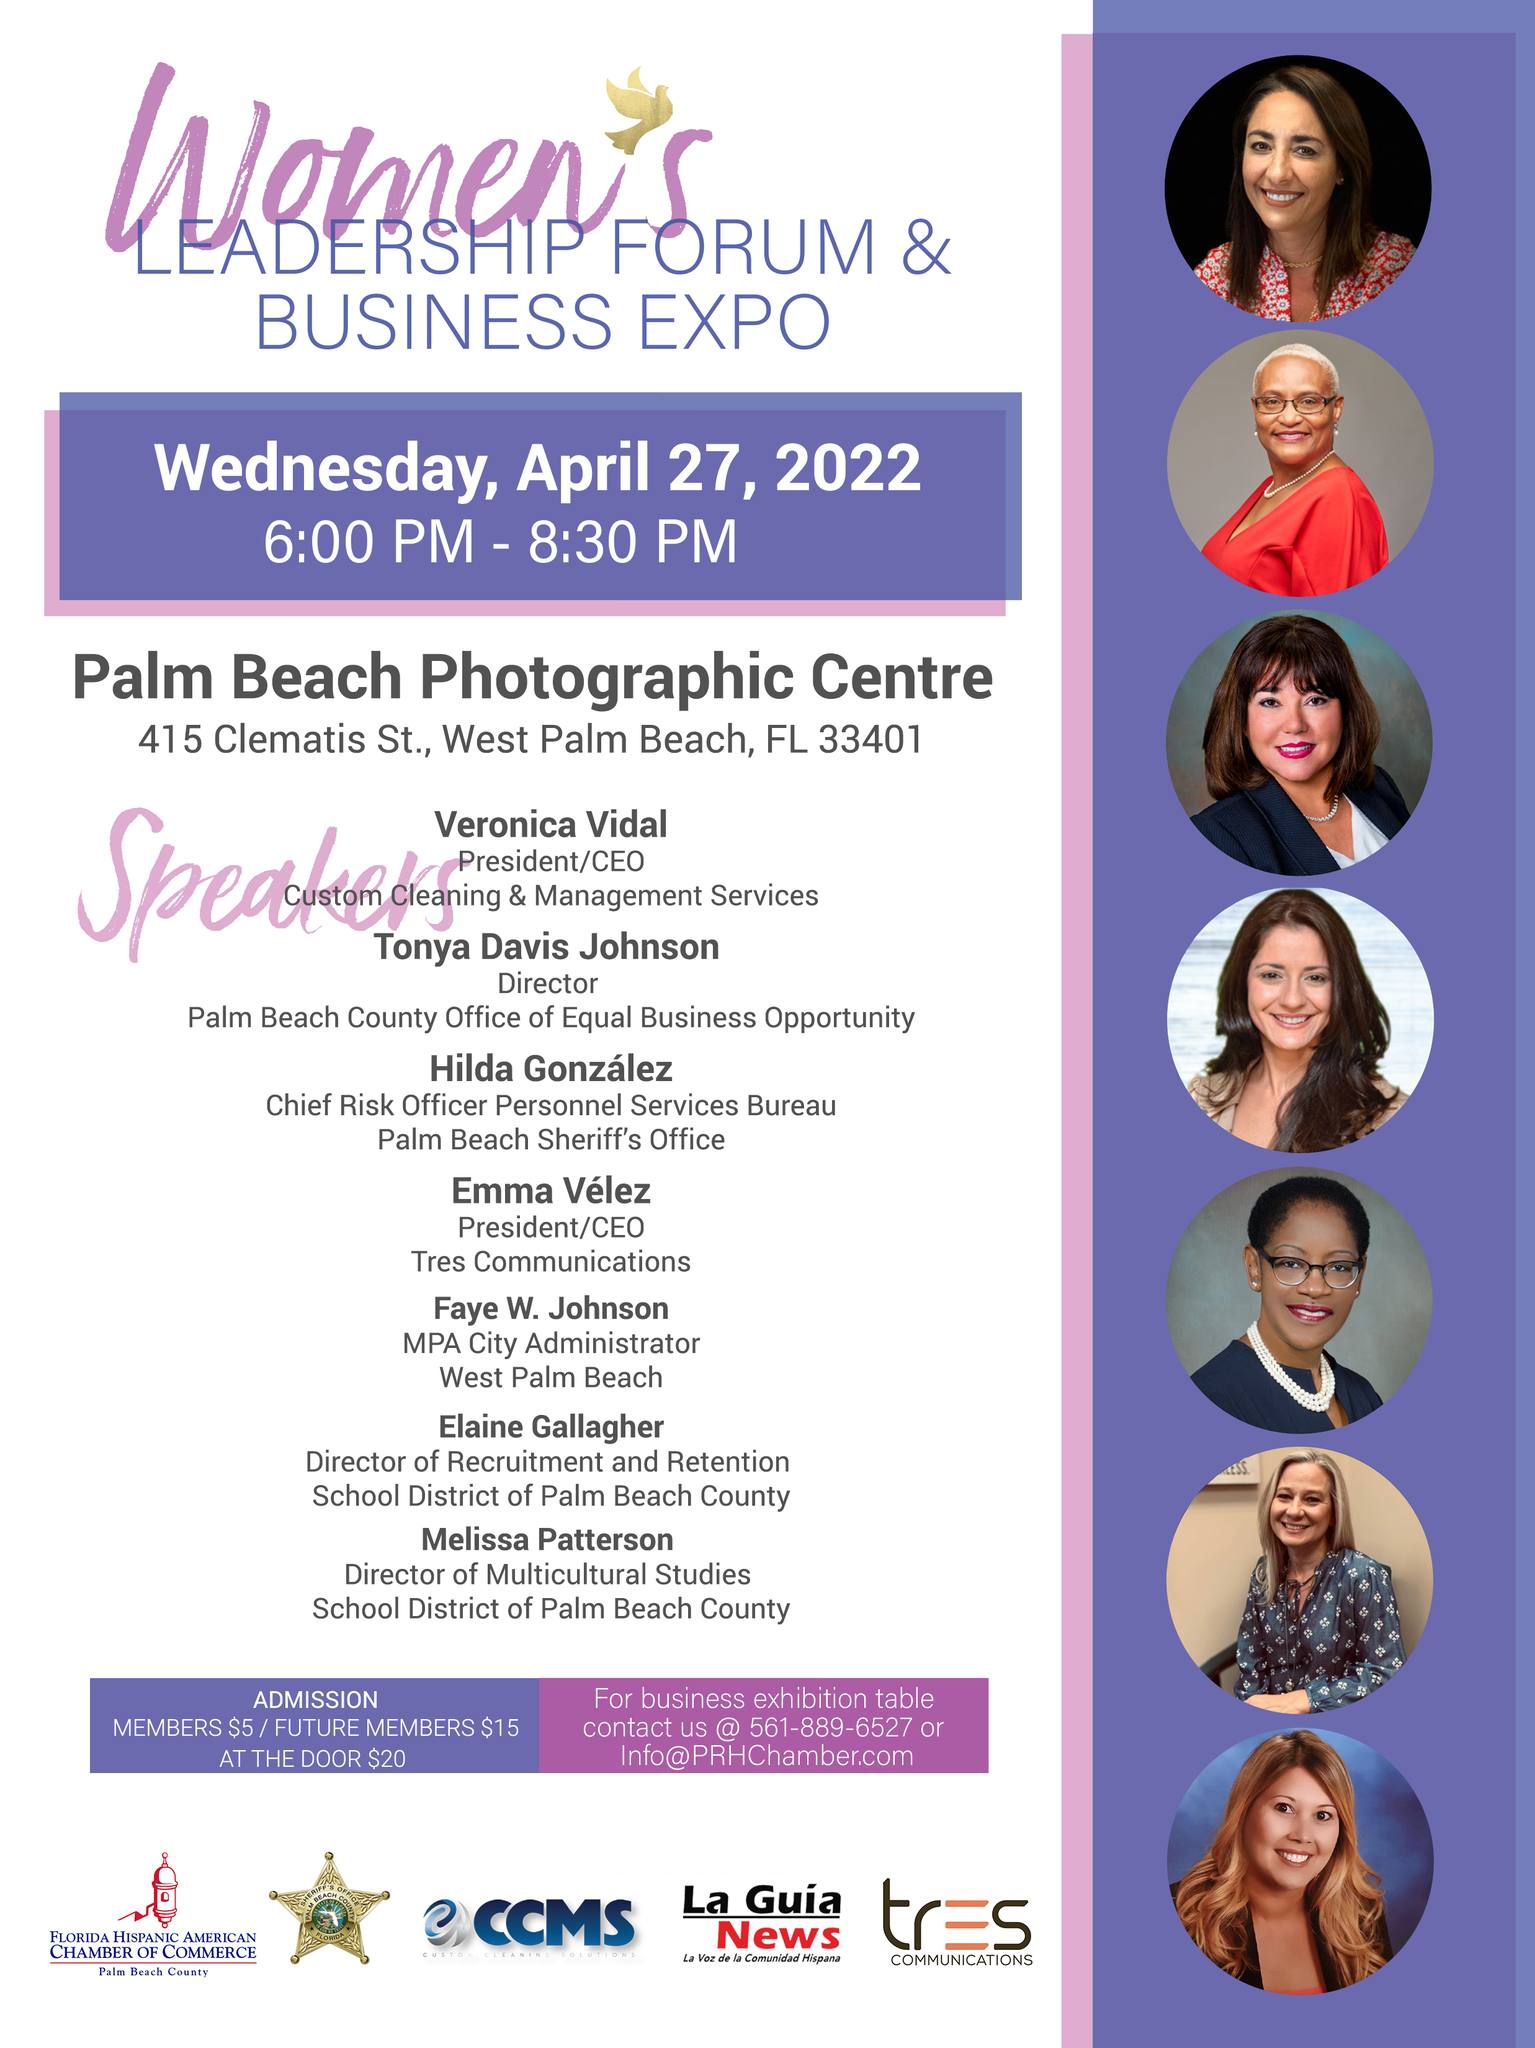 The Women’s Leadership Forum & Business Expo 2022 “Empowering All Women.” 